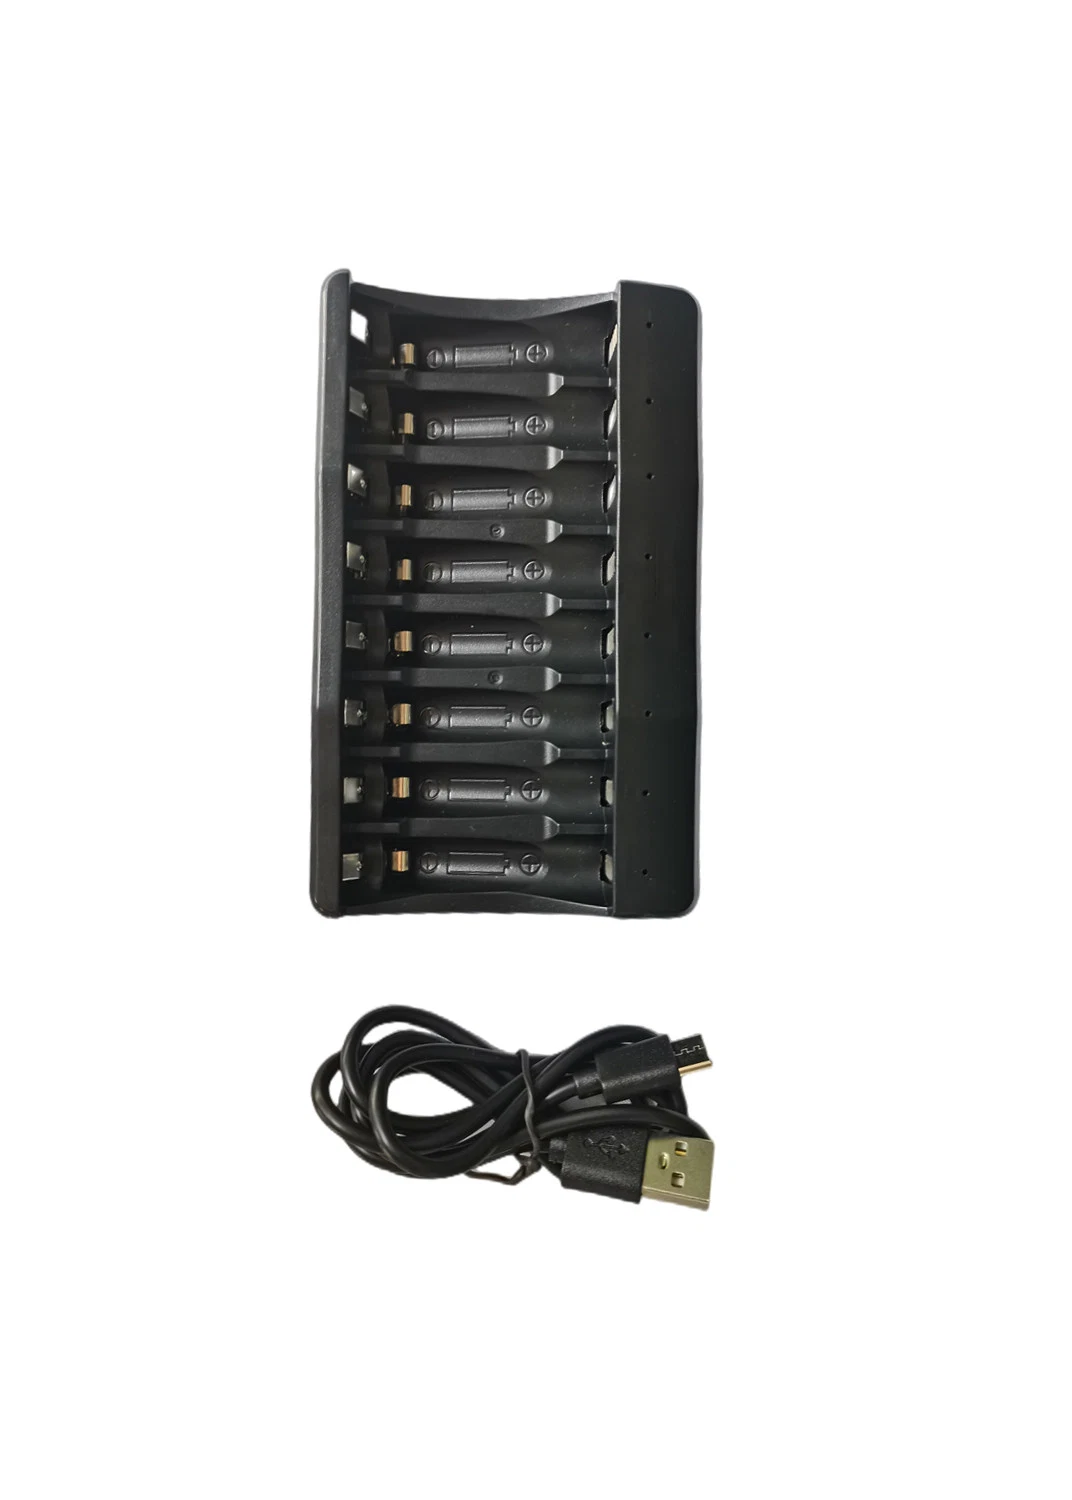 Hot Sale 8 Bay Smart Battery Charger LED Display for AA/AAA NiMH Rechargeable Batteries